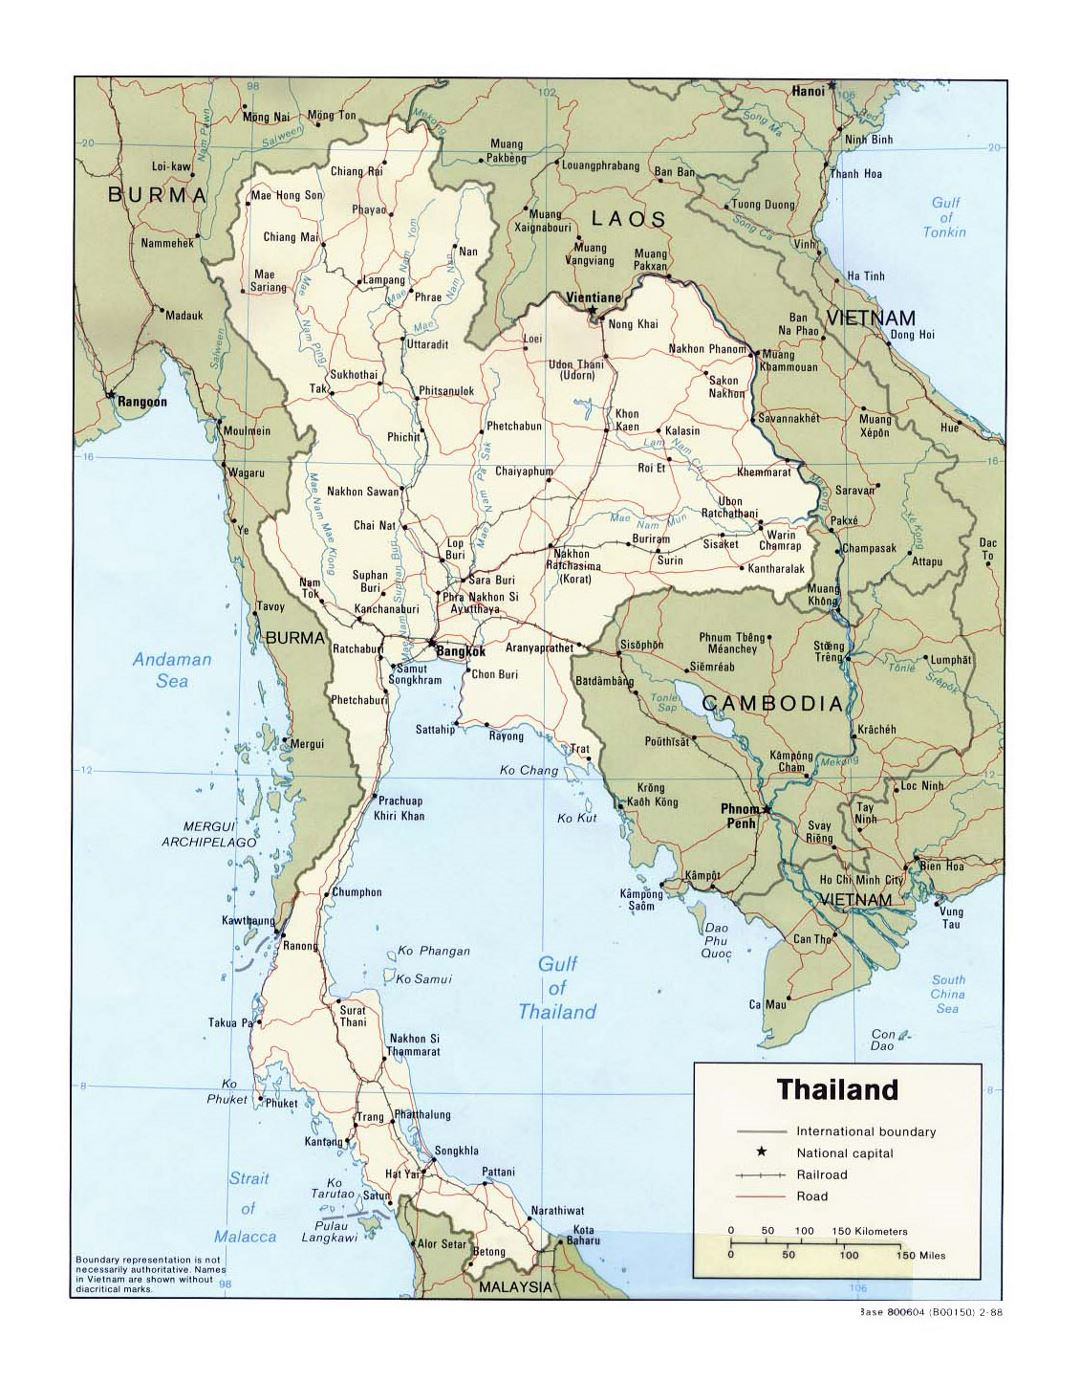 Detailed political map of Thailand with roads, railorads and major cities - 1988